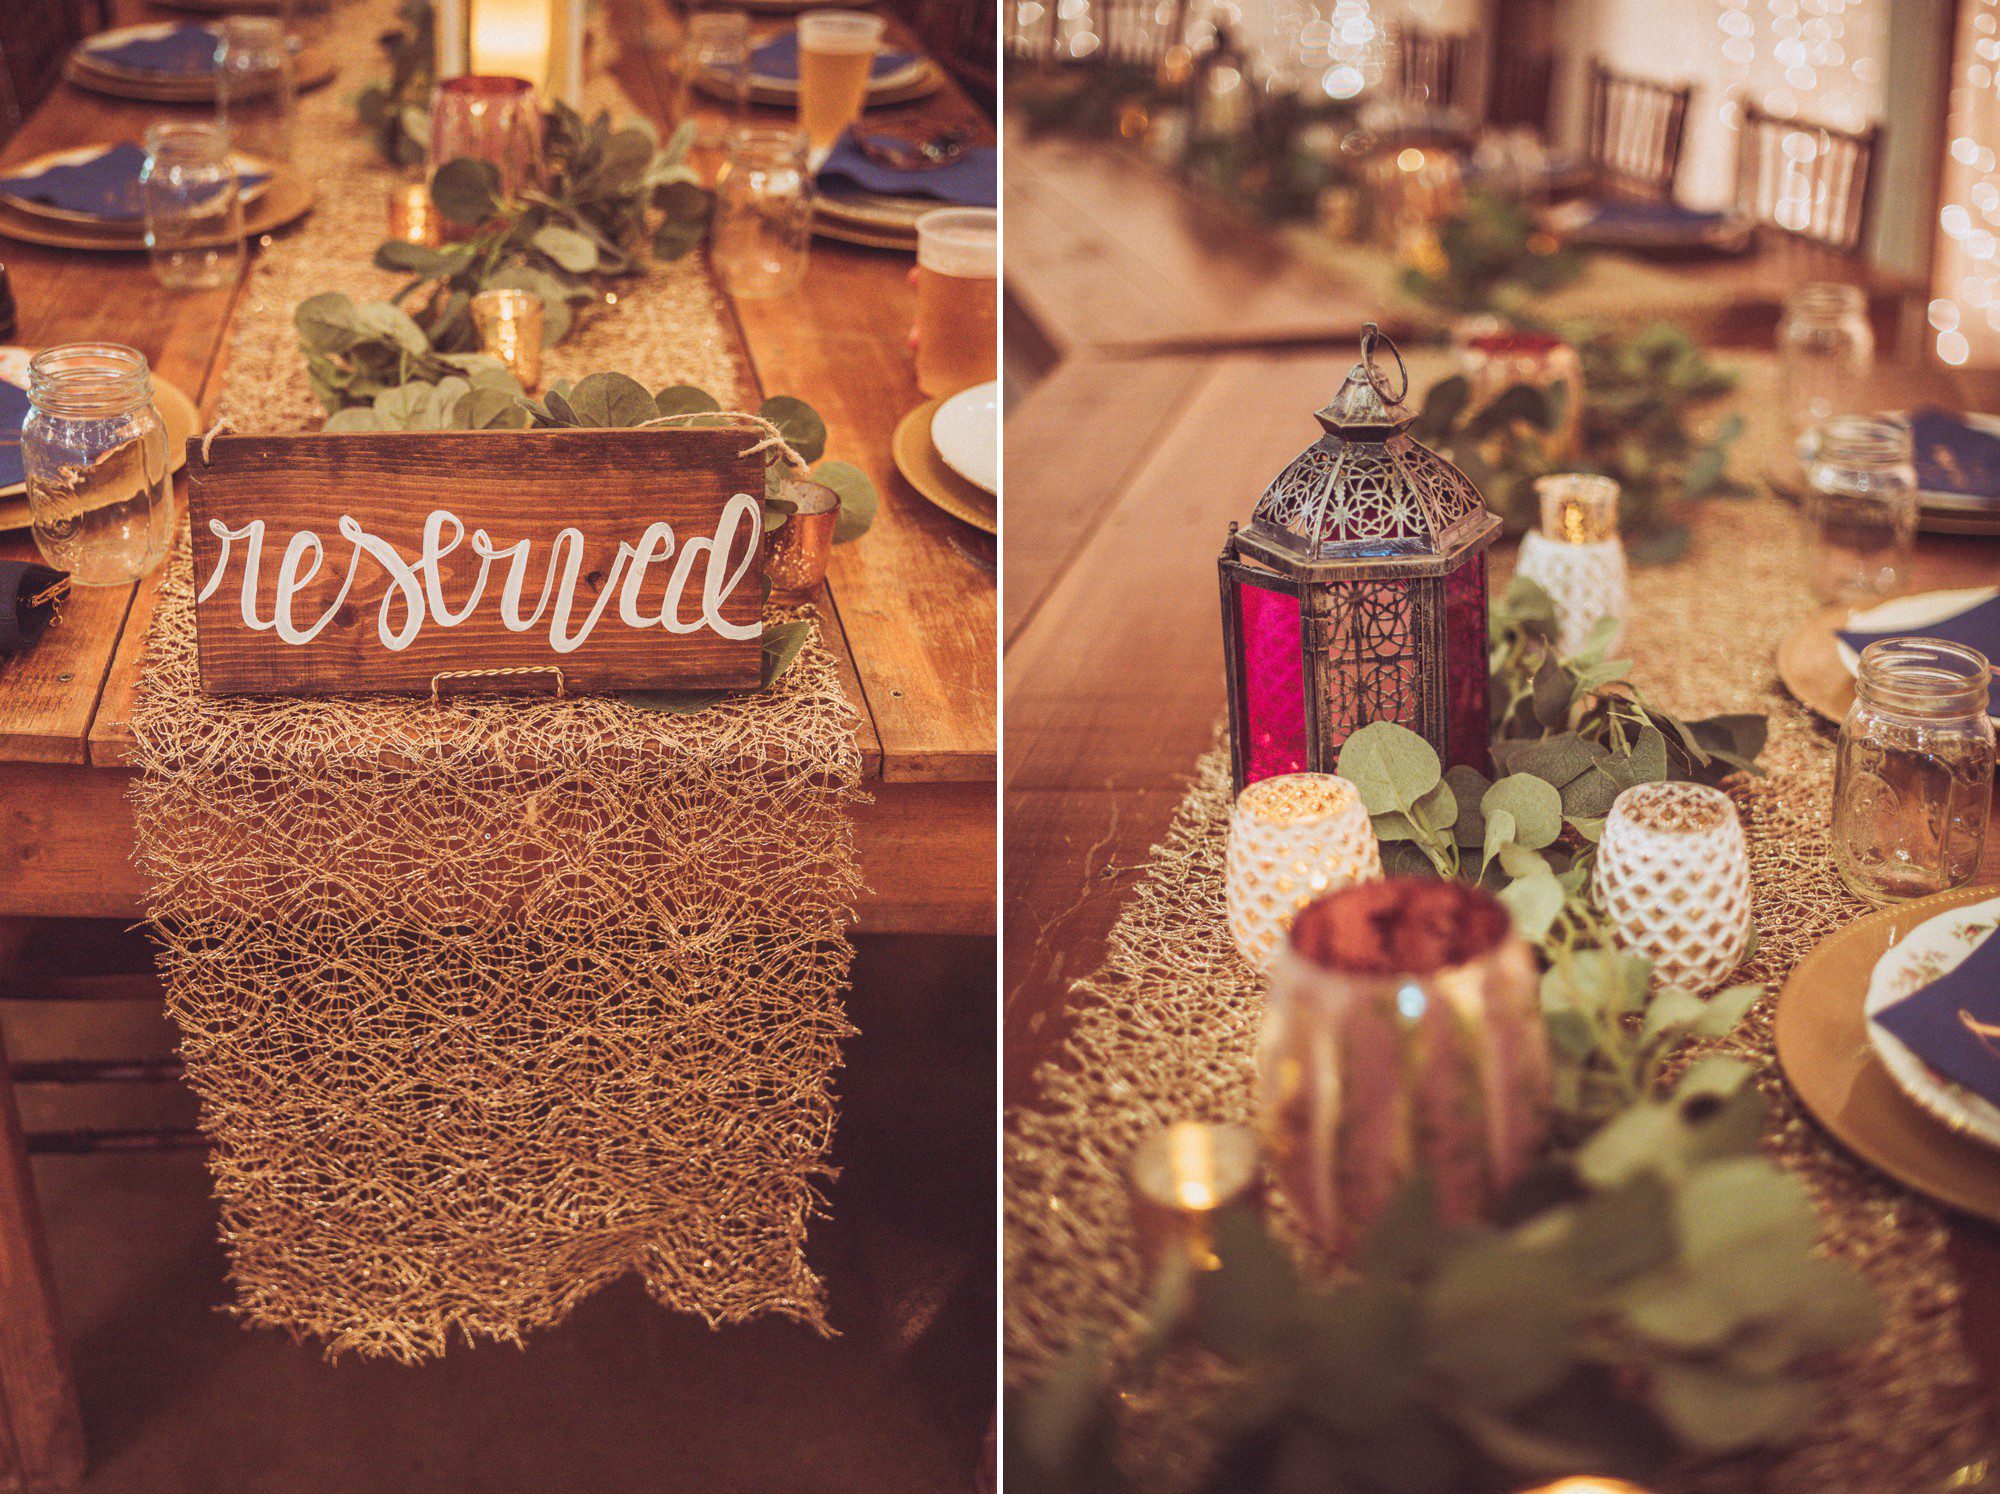 Rustic glam wedding decor with table runners and lantern centerpieces